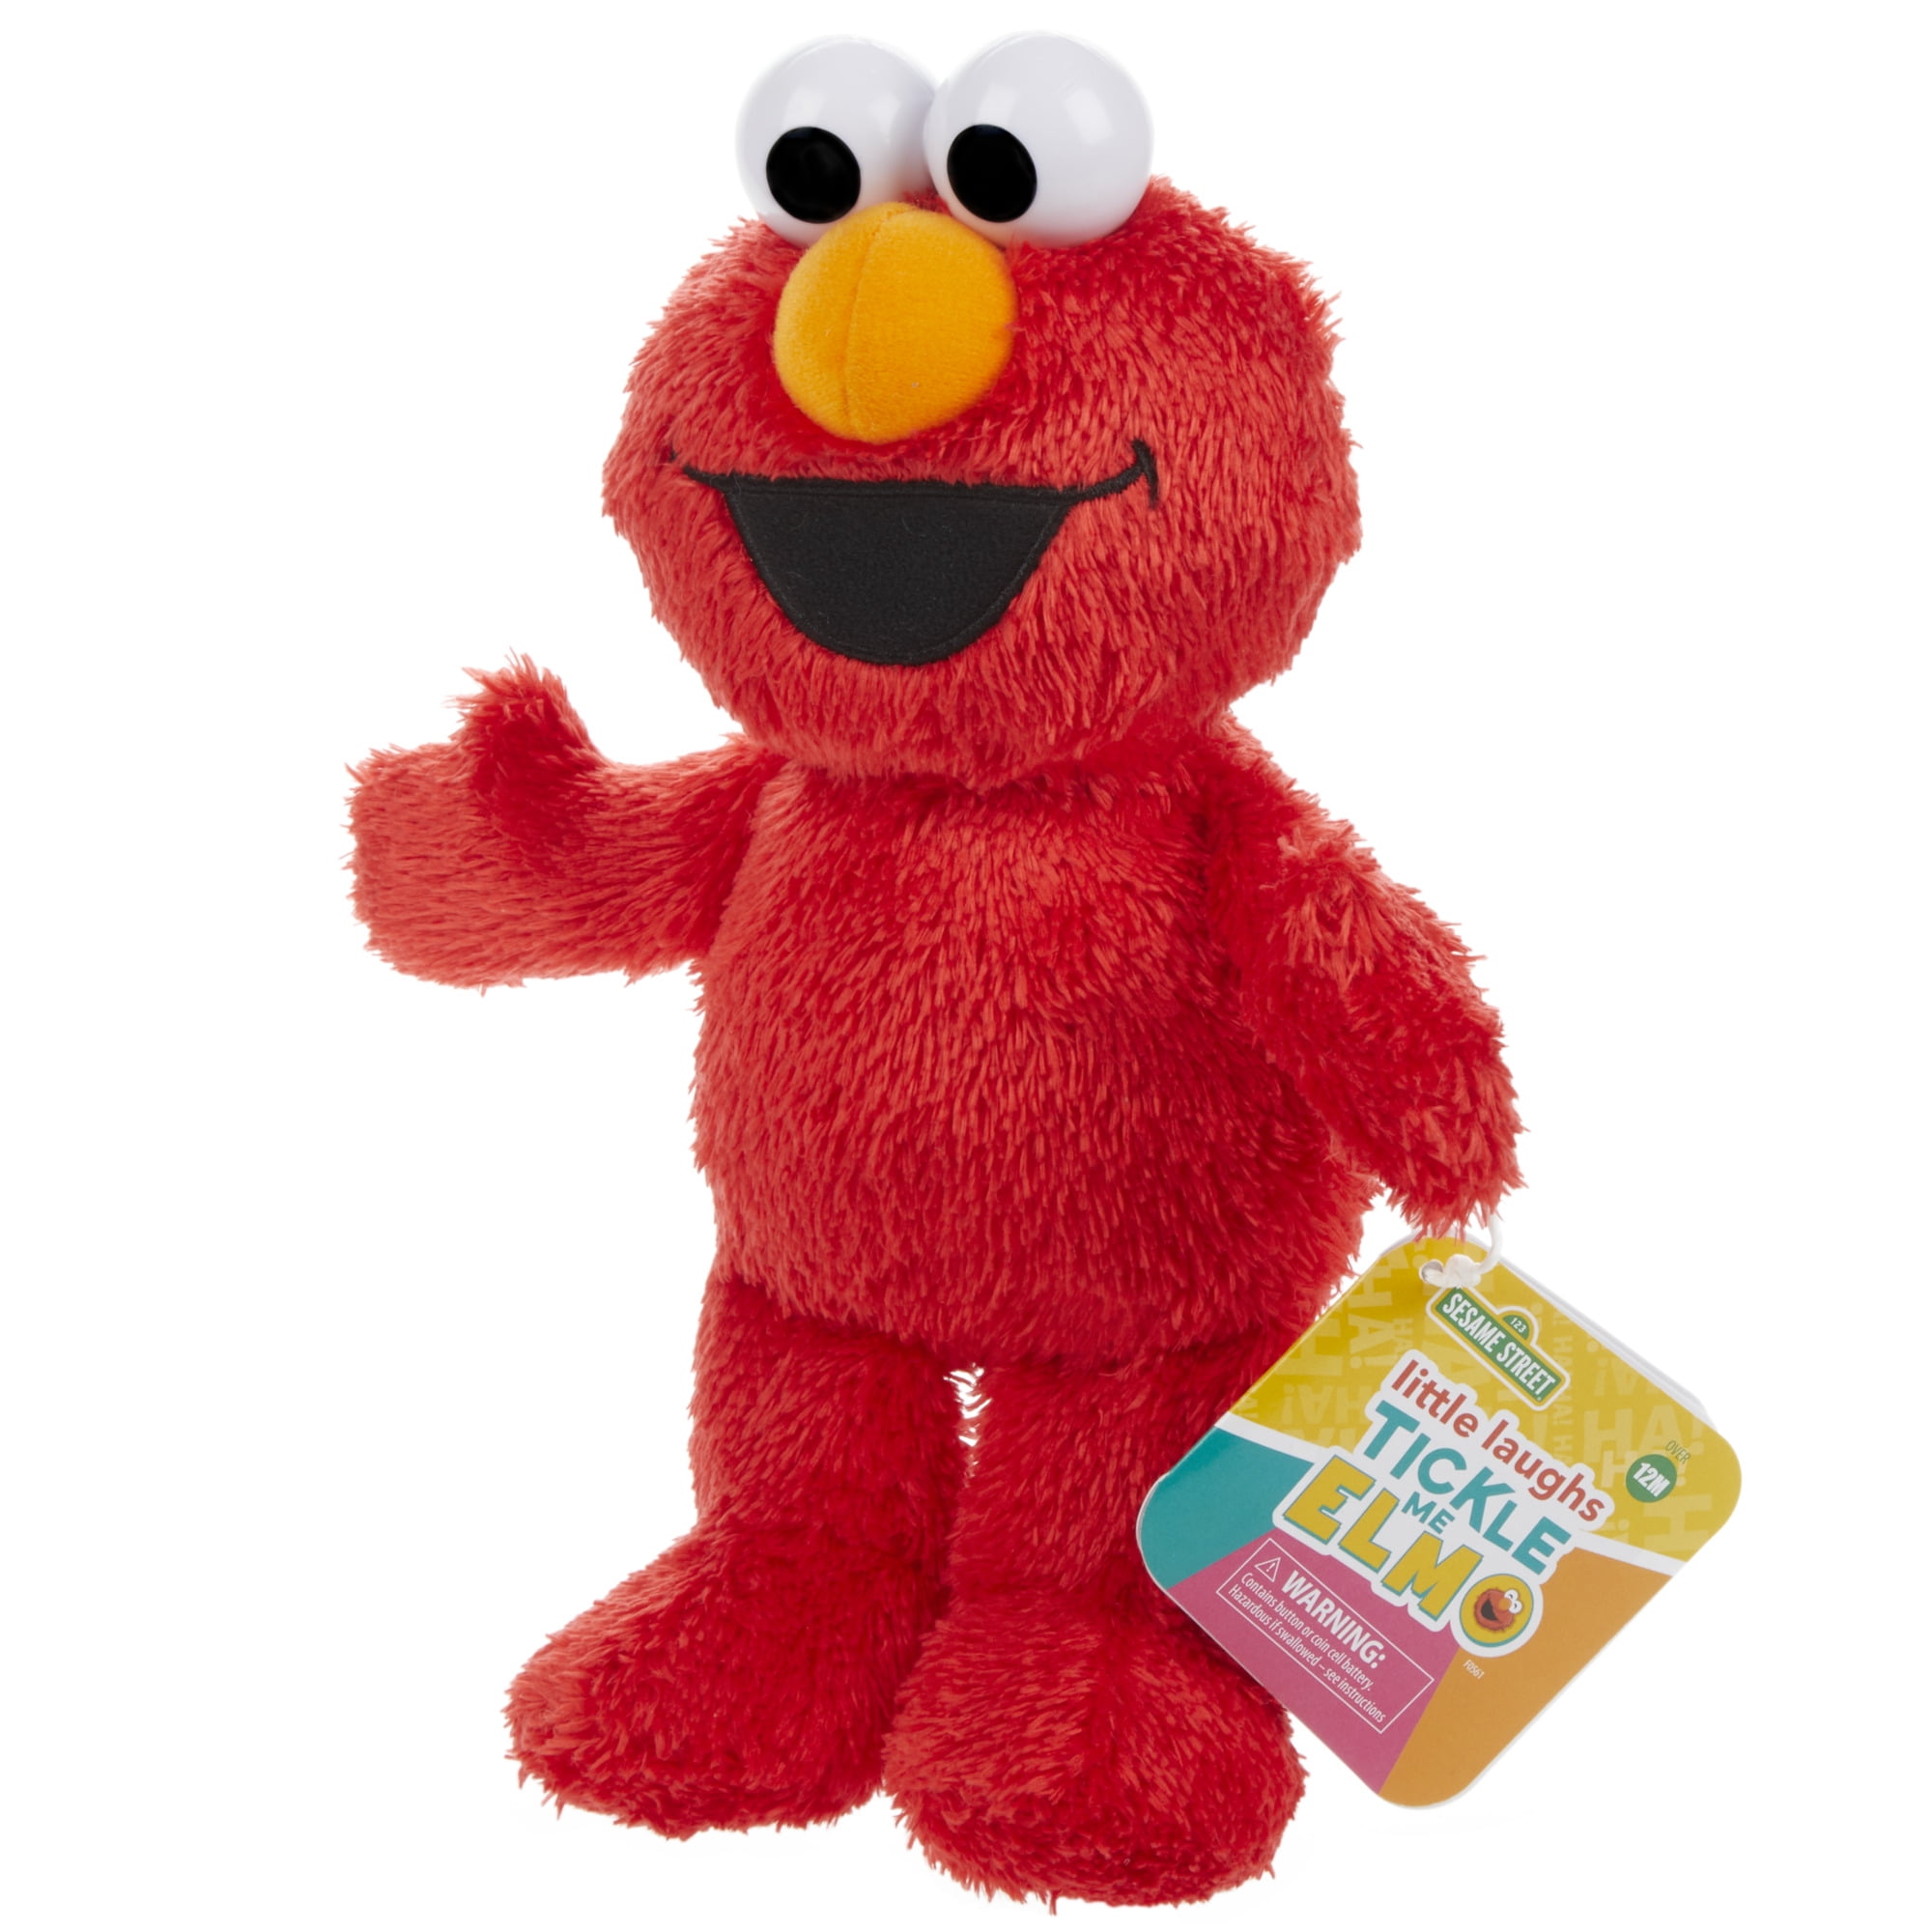 Red for sale online Hasbro C0923 Tickle Me Elmo Plush Toy 